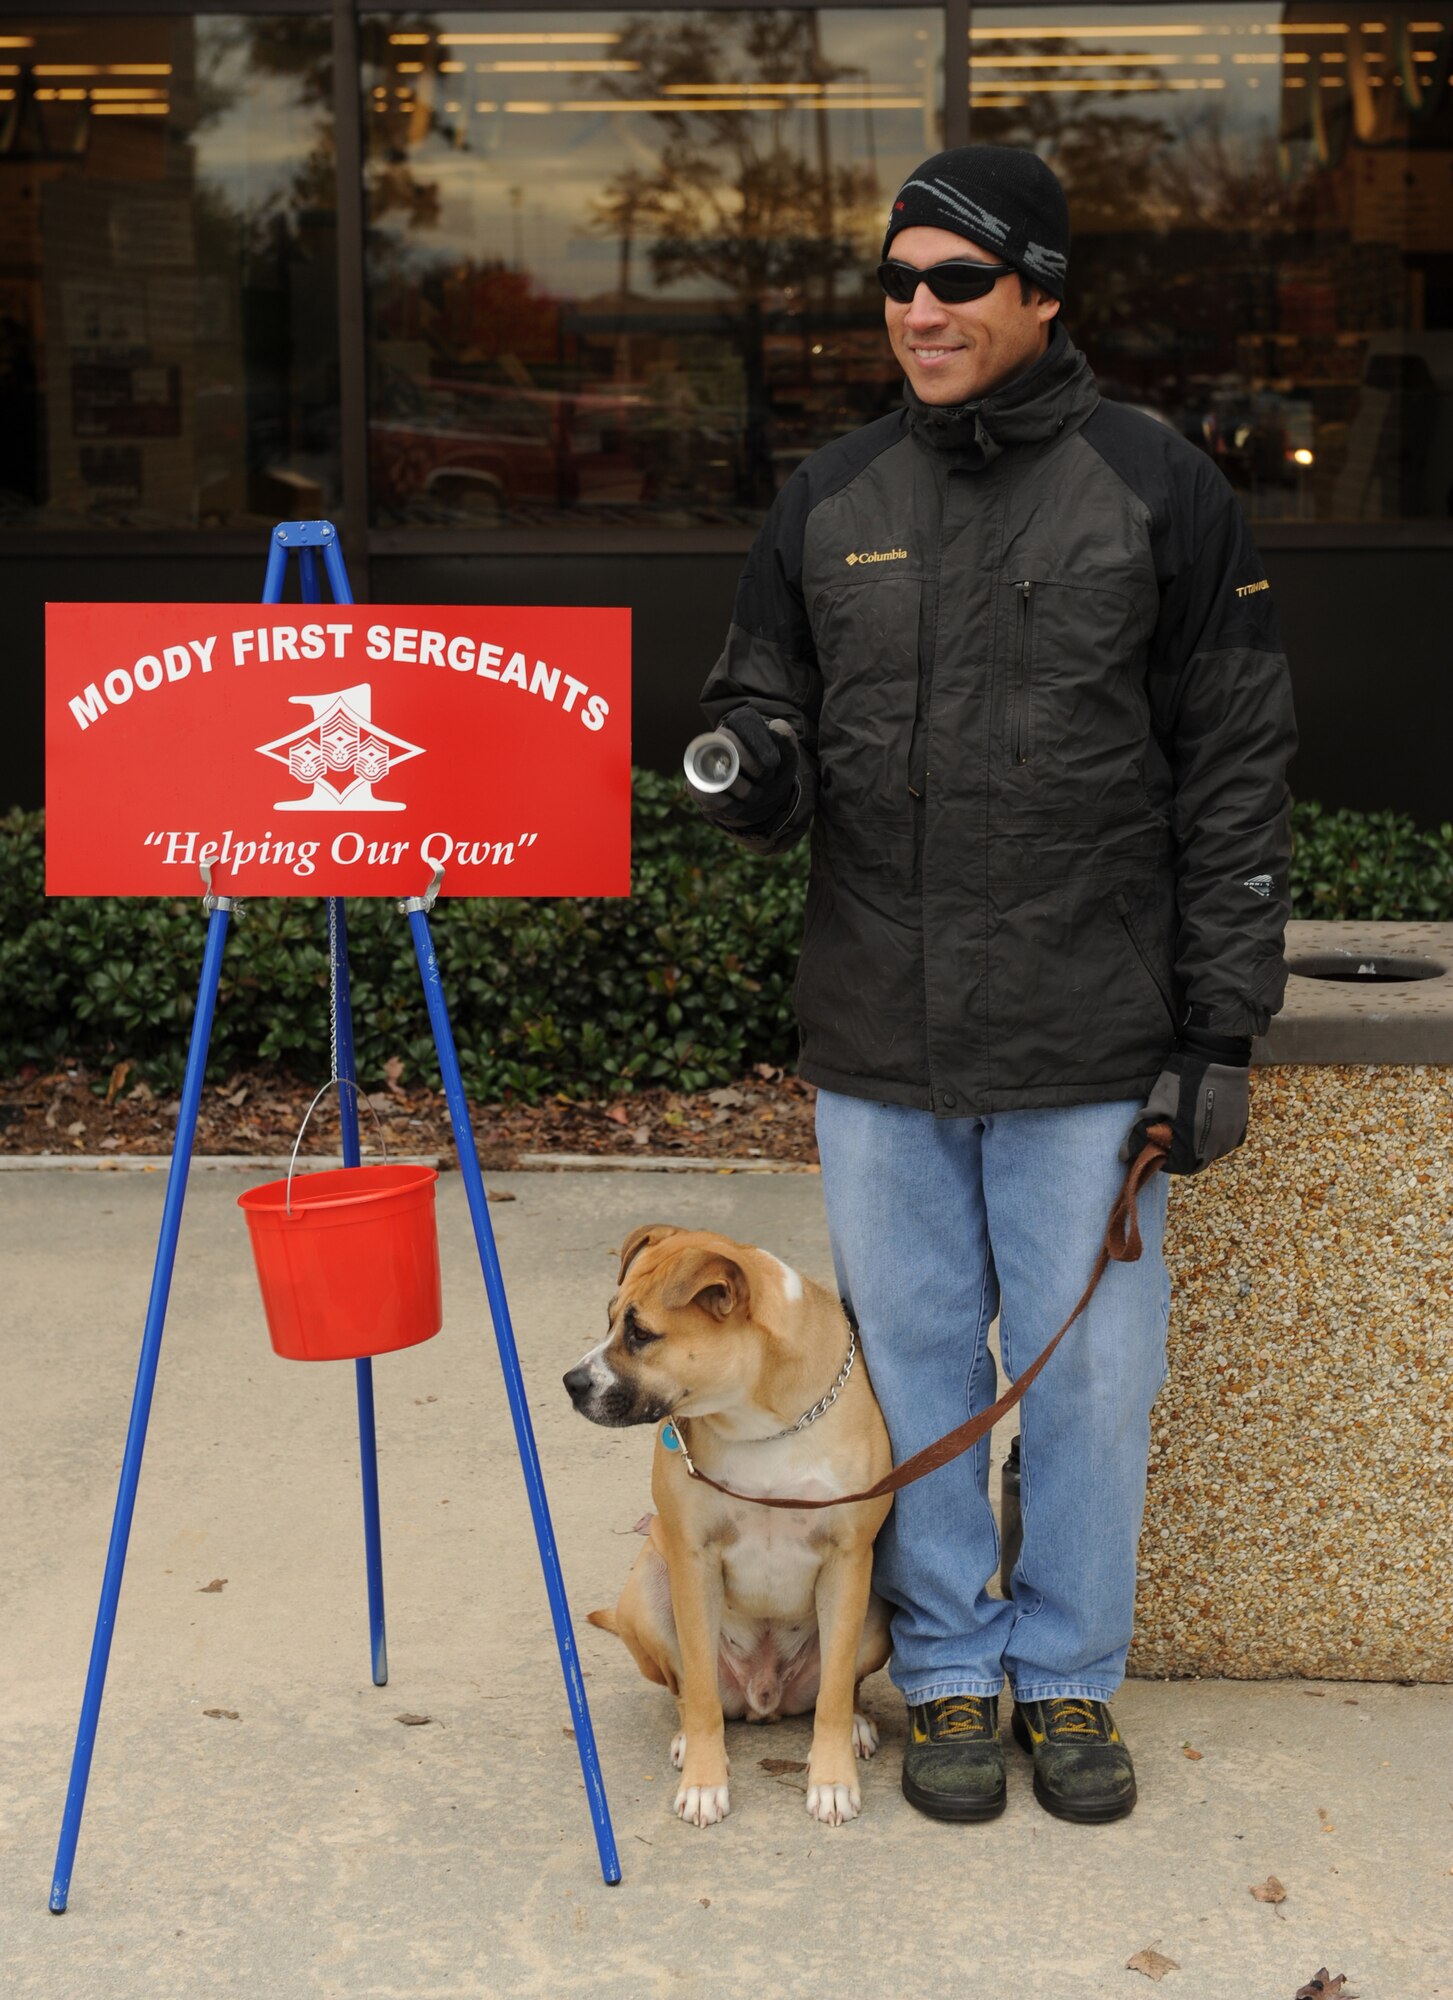 MOODY AIR FORCE BASE, Ga. -- Master Sgt. Roger Martinez, 723rd Aircraft Maintenance Squadron electronic warfare supervisor, along with his dog, Buddy, volunteer to help collect donations during the Ring-a-Bell program here Dec. 11. Sergeant Martinez is helping to raise money for the Moody First Sergeant’s Association to assist Moody families in need during the holiday season. (U.S. Air Force photo by Airman 1st Class Benjamin Wiseman)